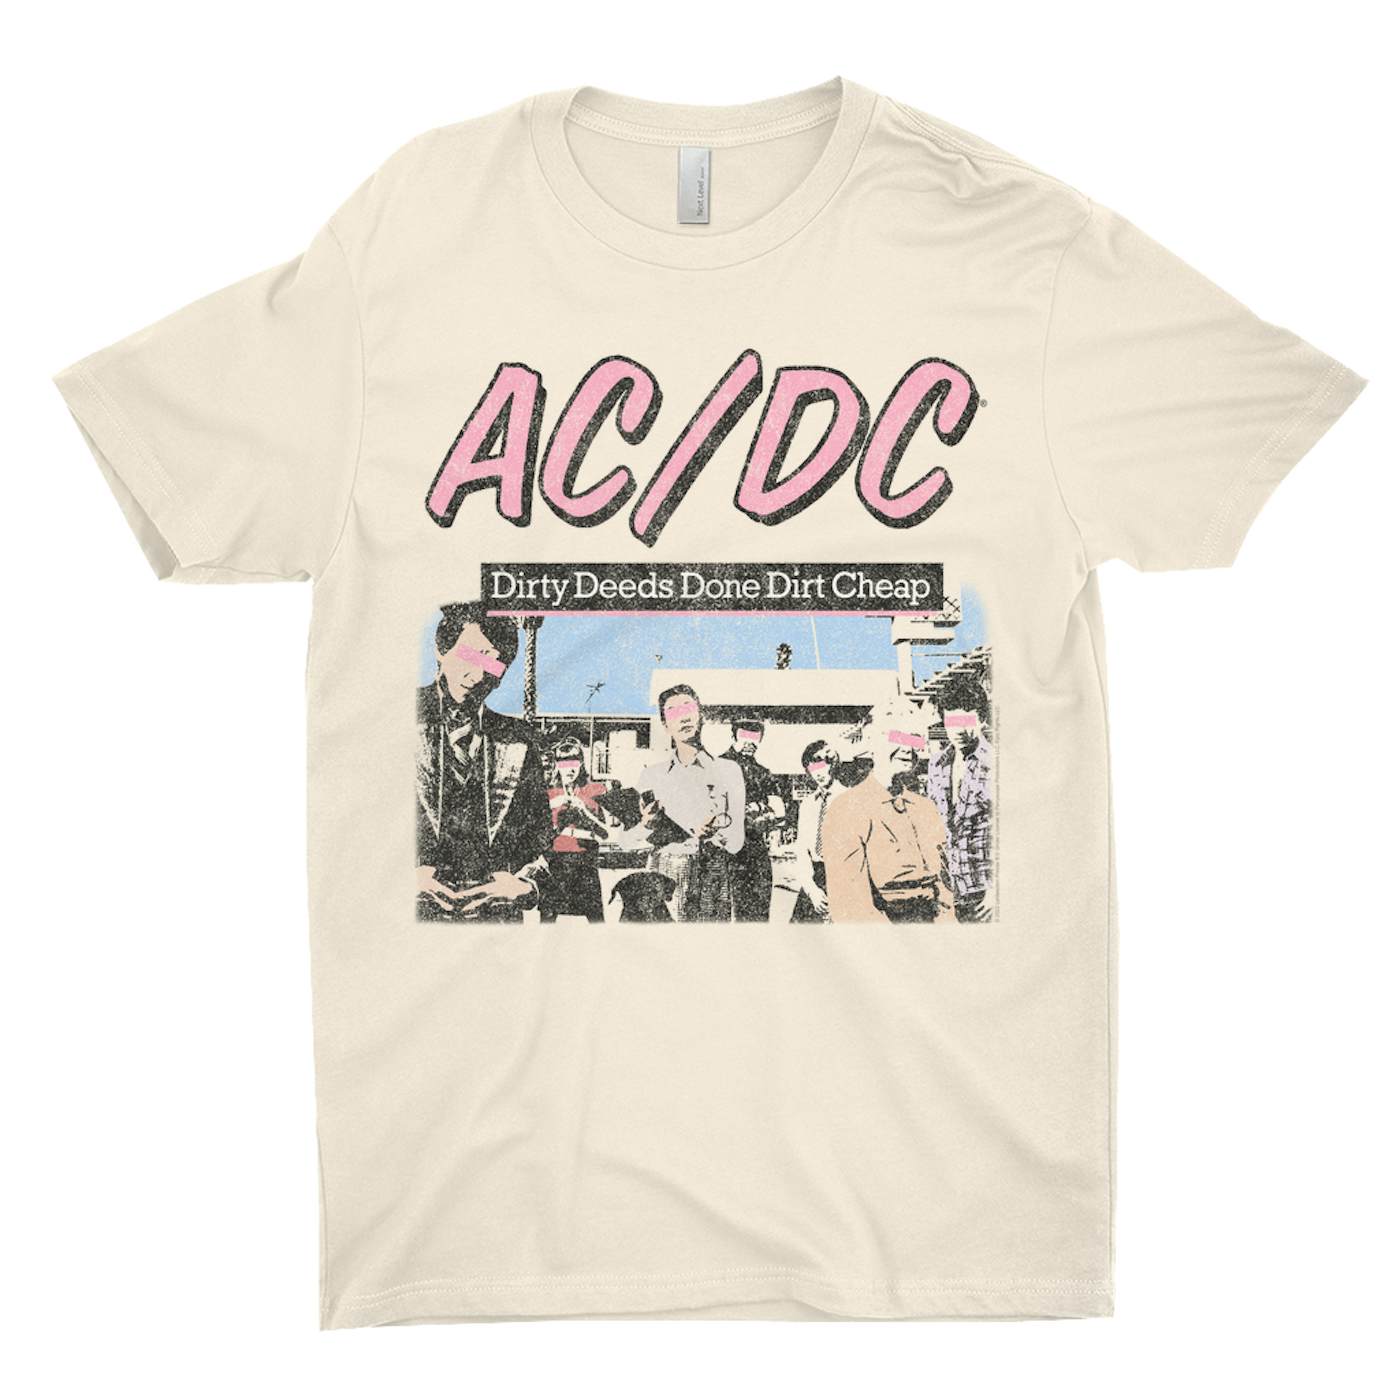 Dirty Deeds Done Dirt Cheap - Acdc - Posters and Art Prints